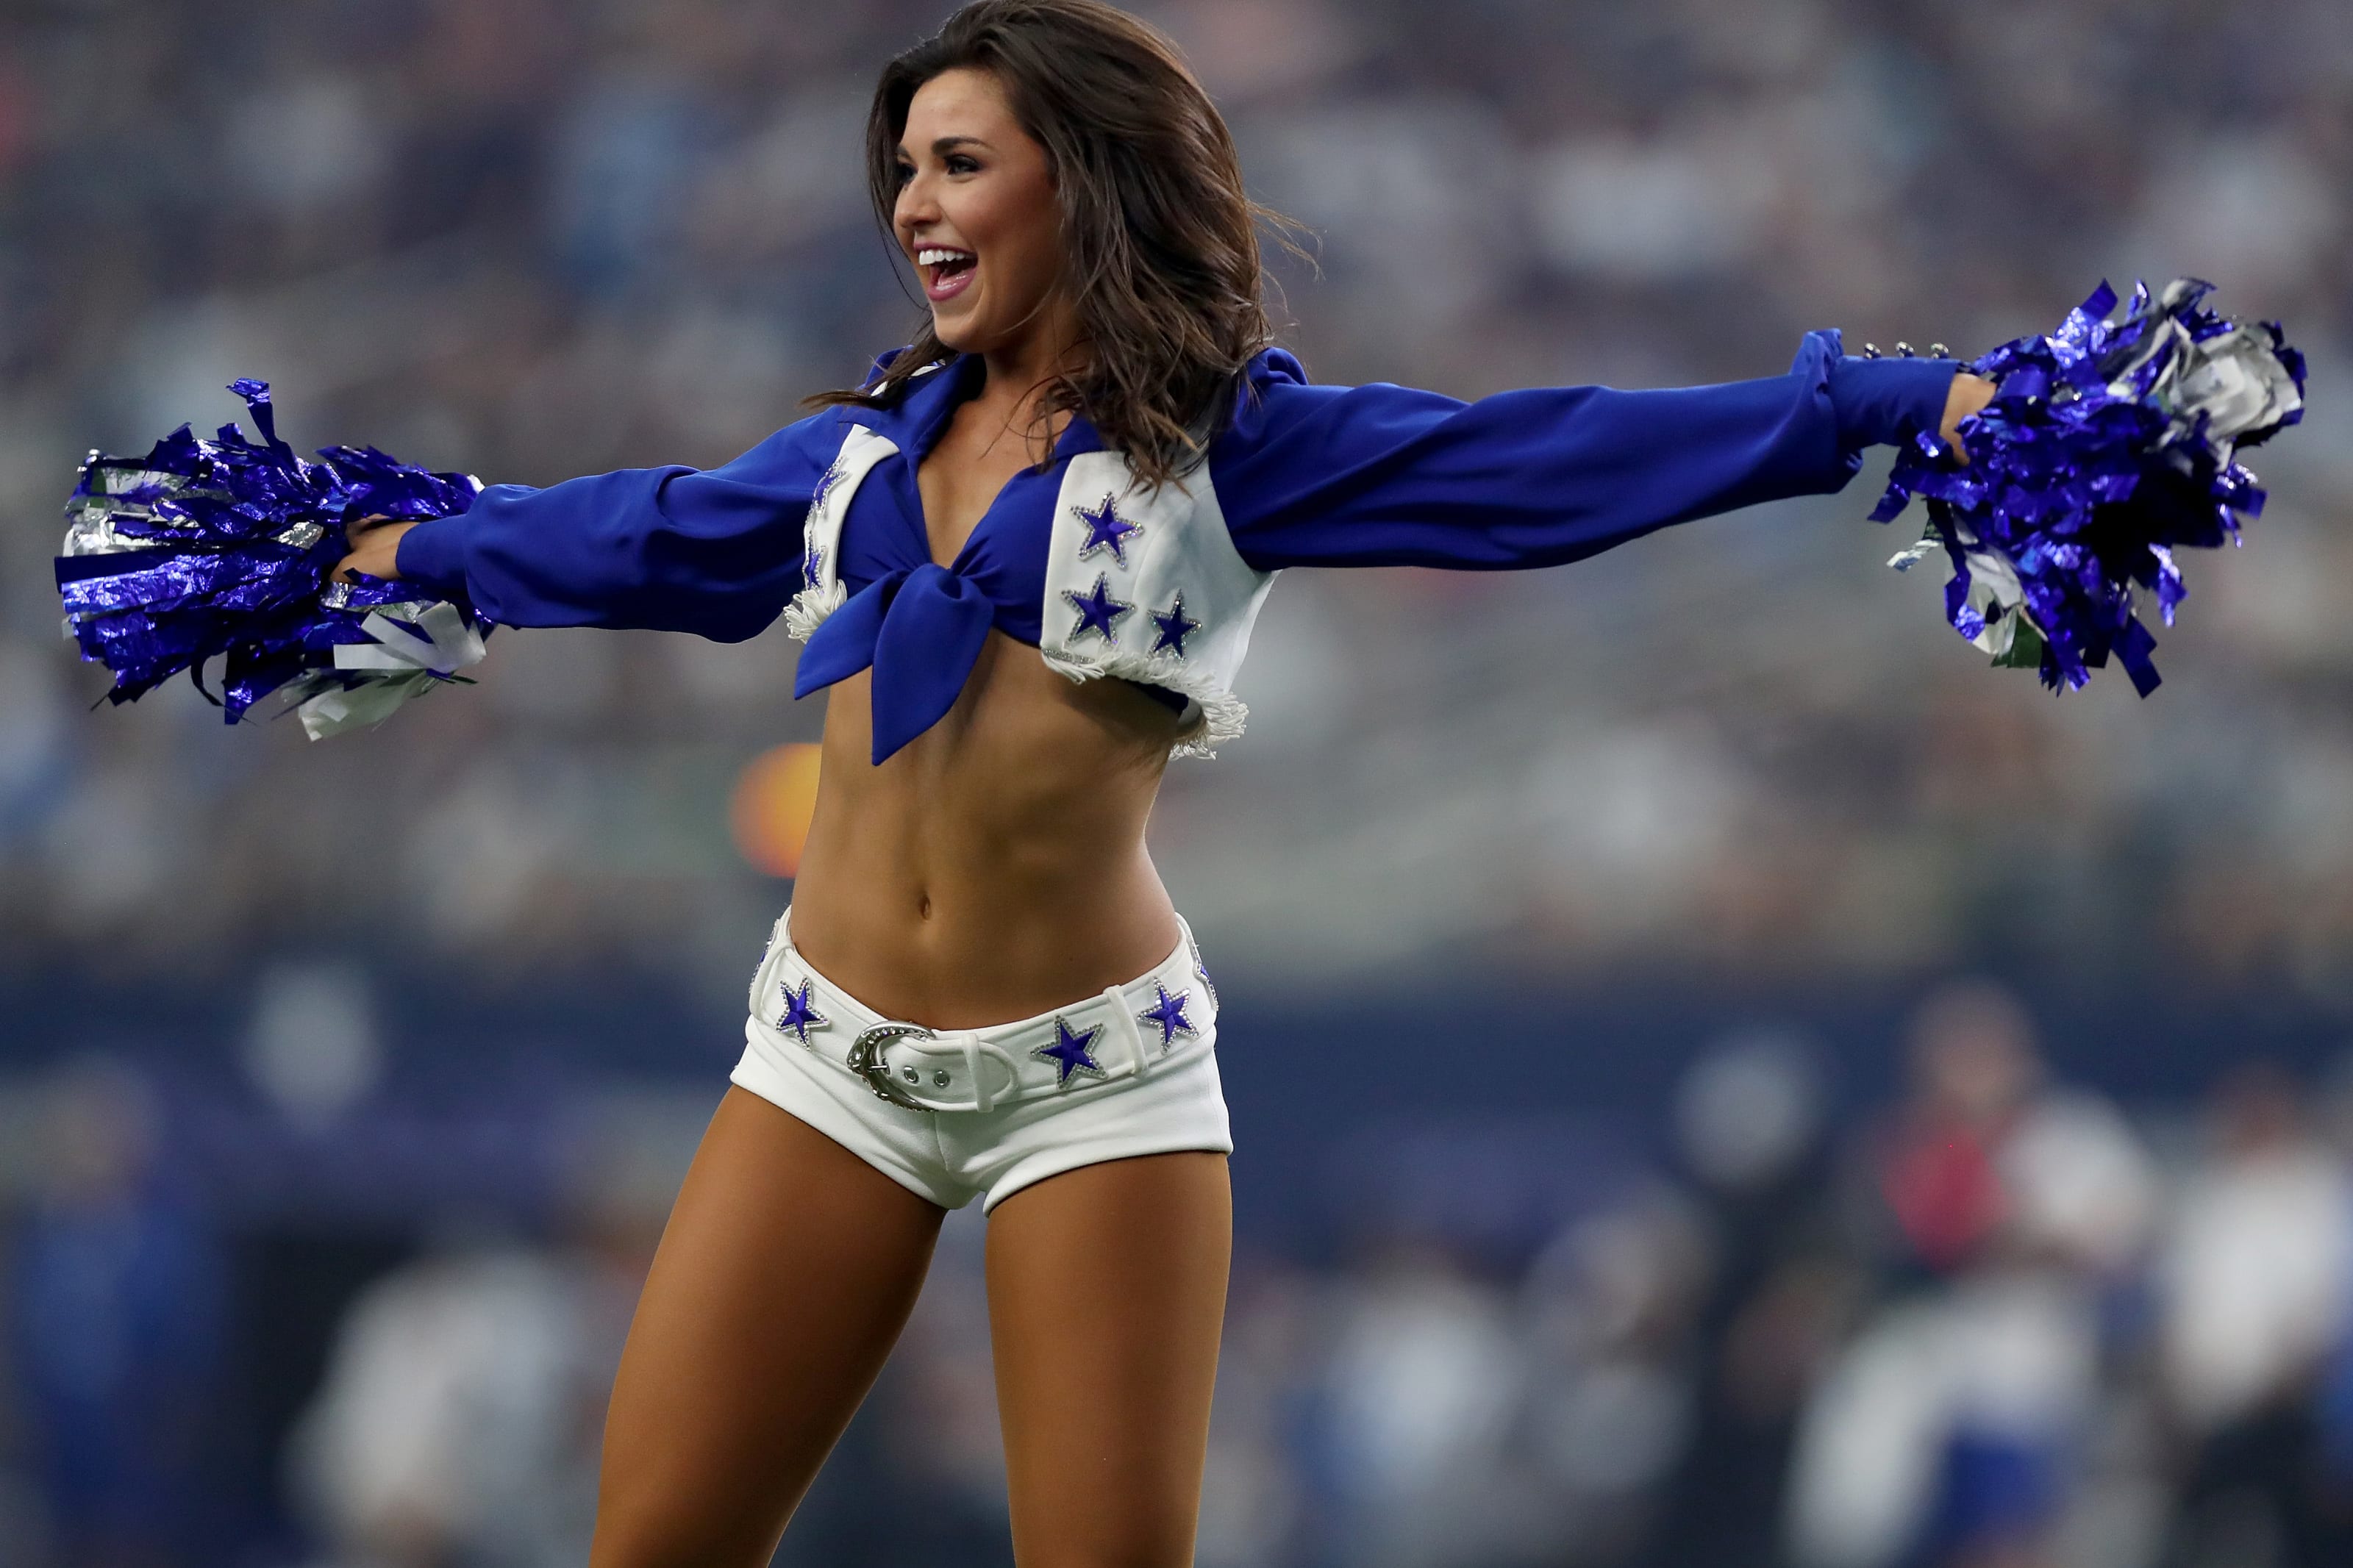 Dallas cowboys cheerleaders holly arielle nude photos and sex tape leaked. 